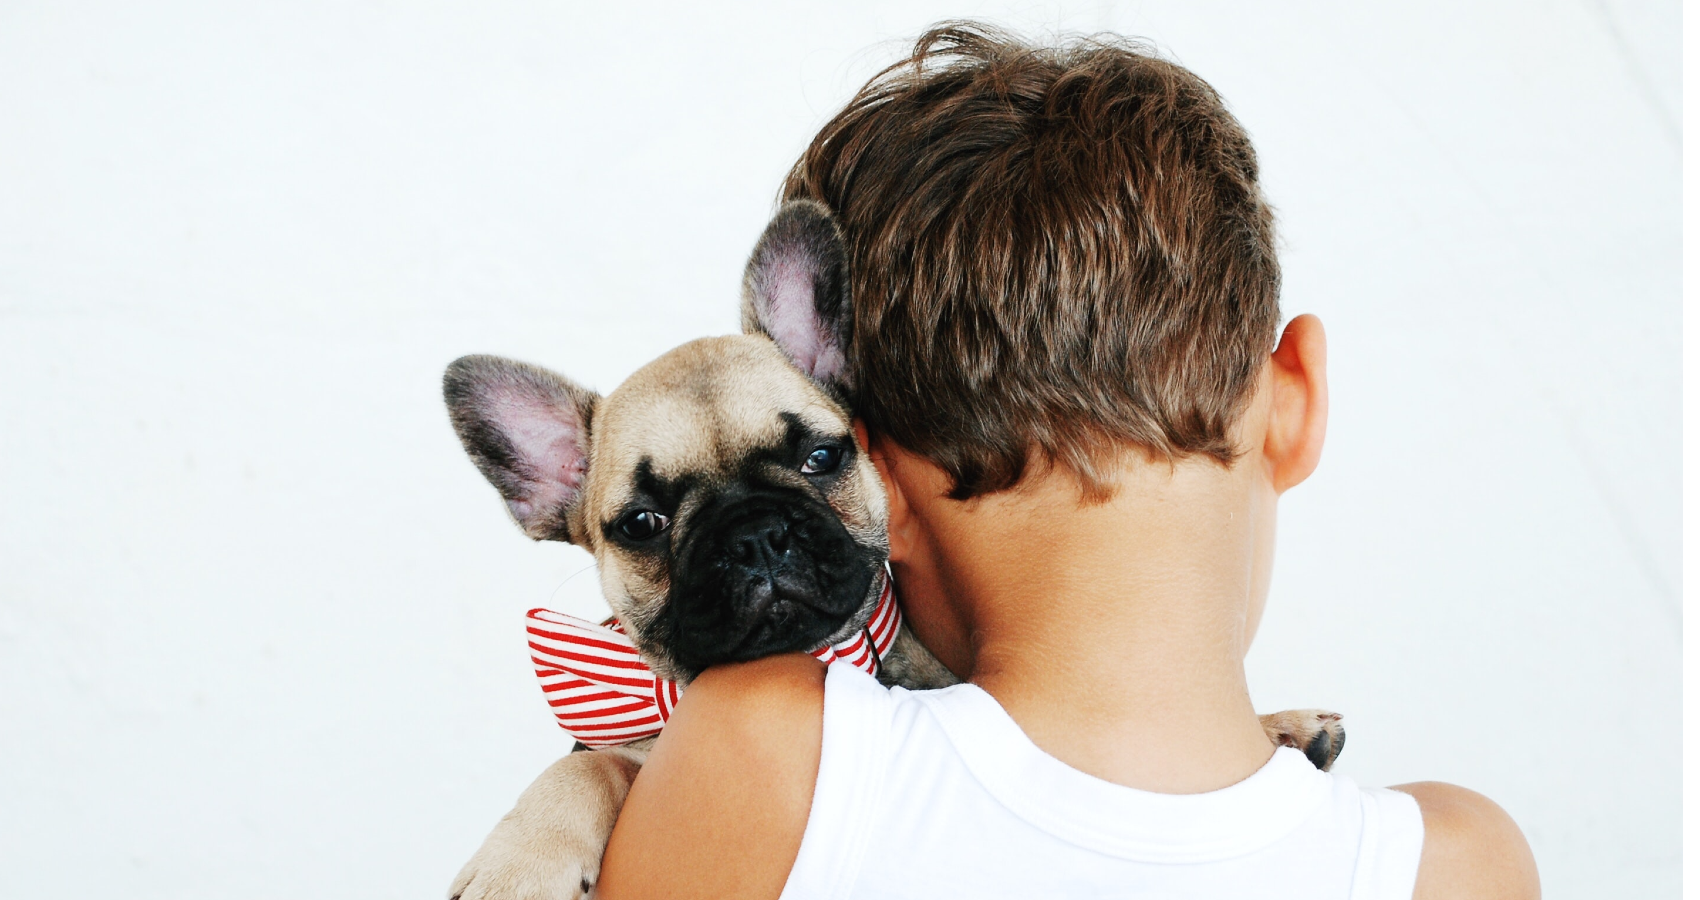 A young boy holding a dog